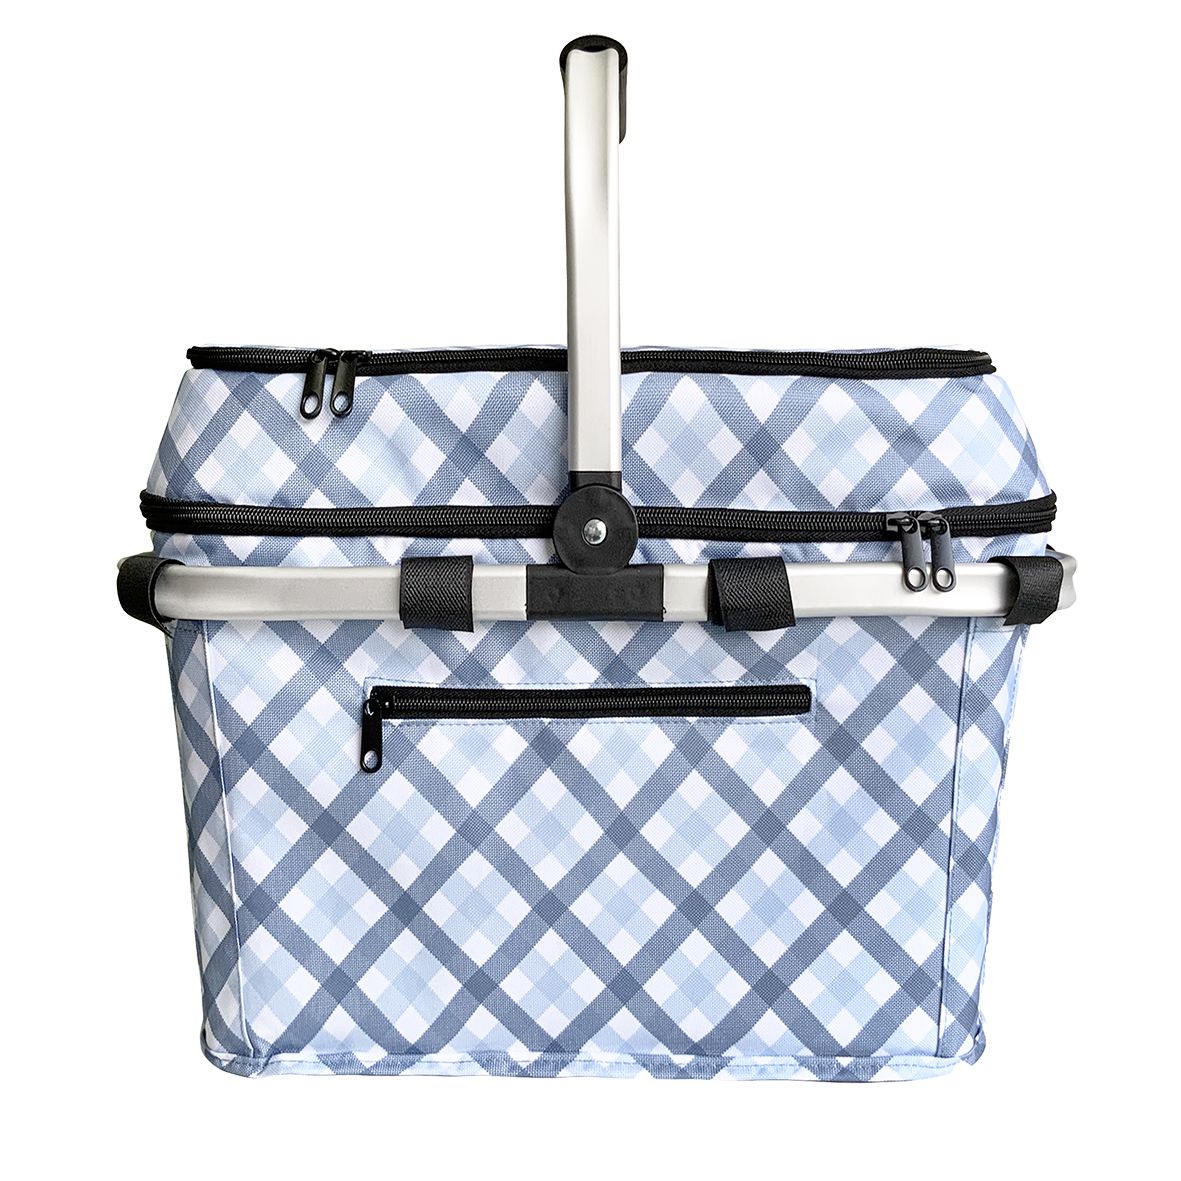 Sachi 4 Person Insulated Picnic Basket Gingham Product Image 1